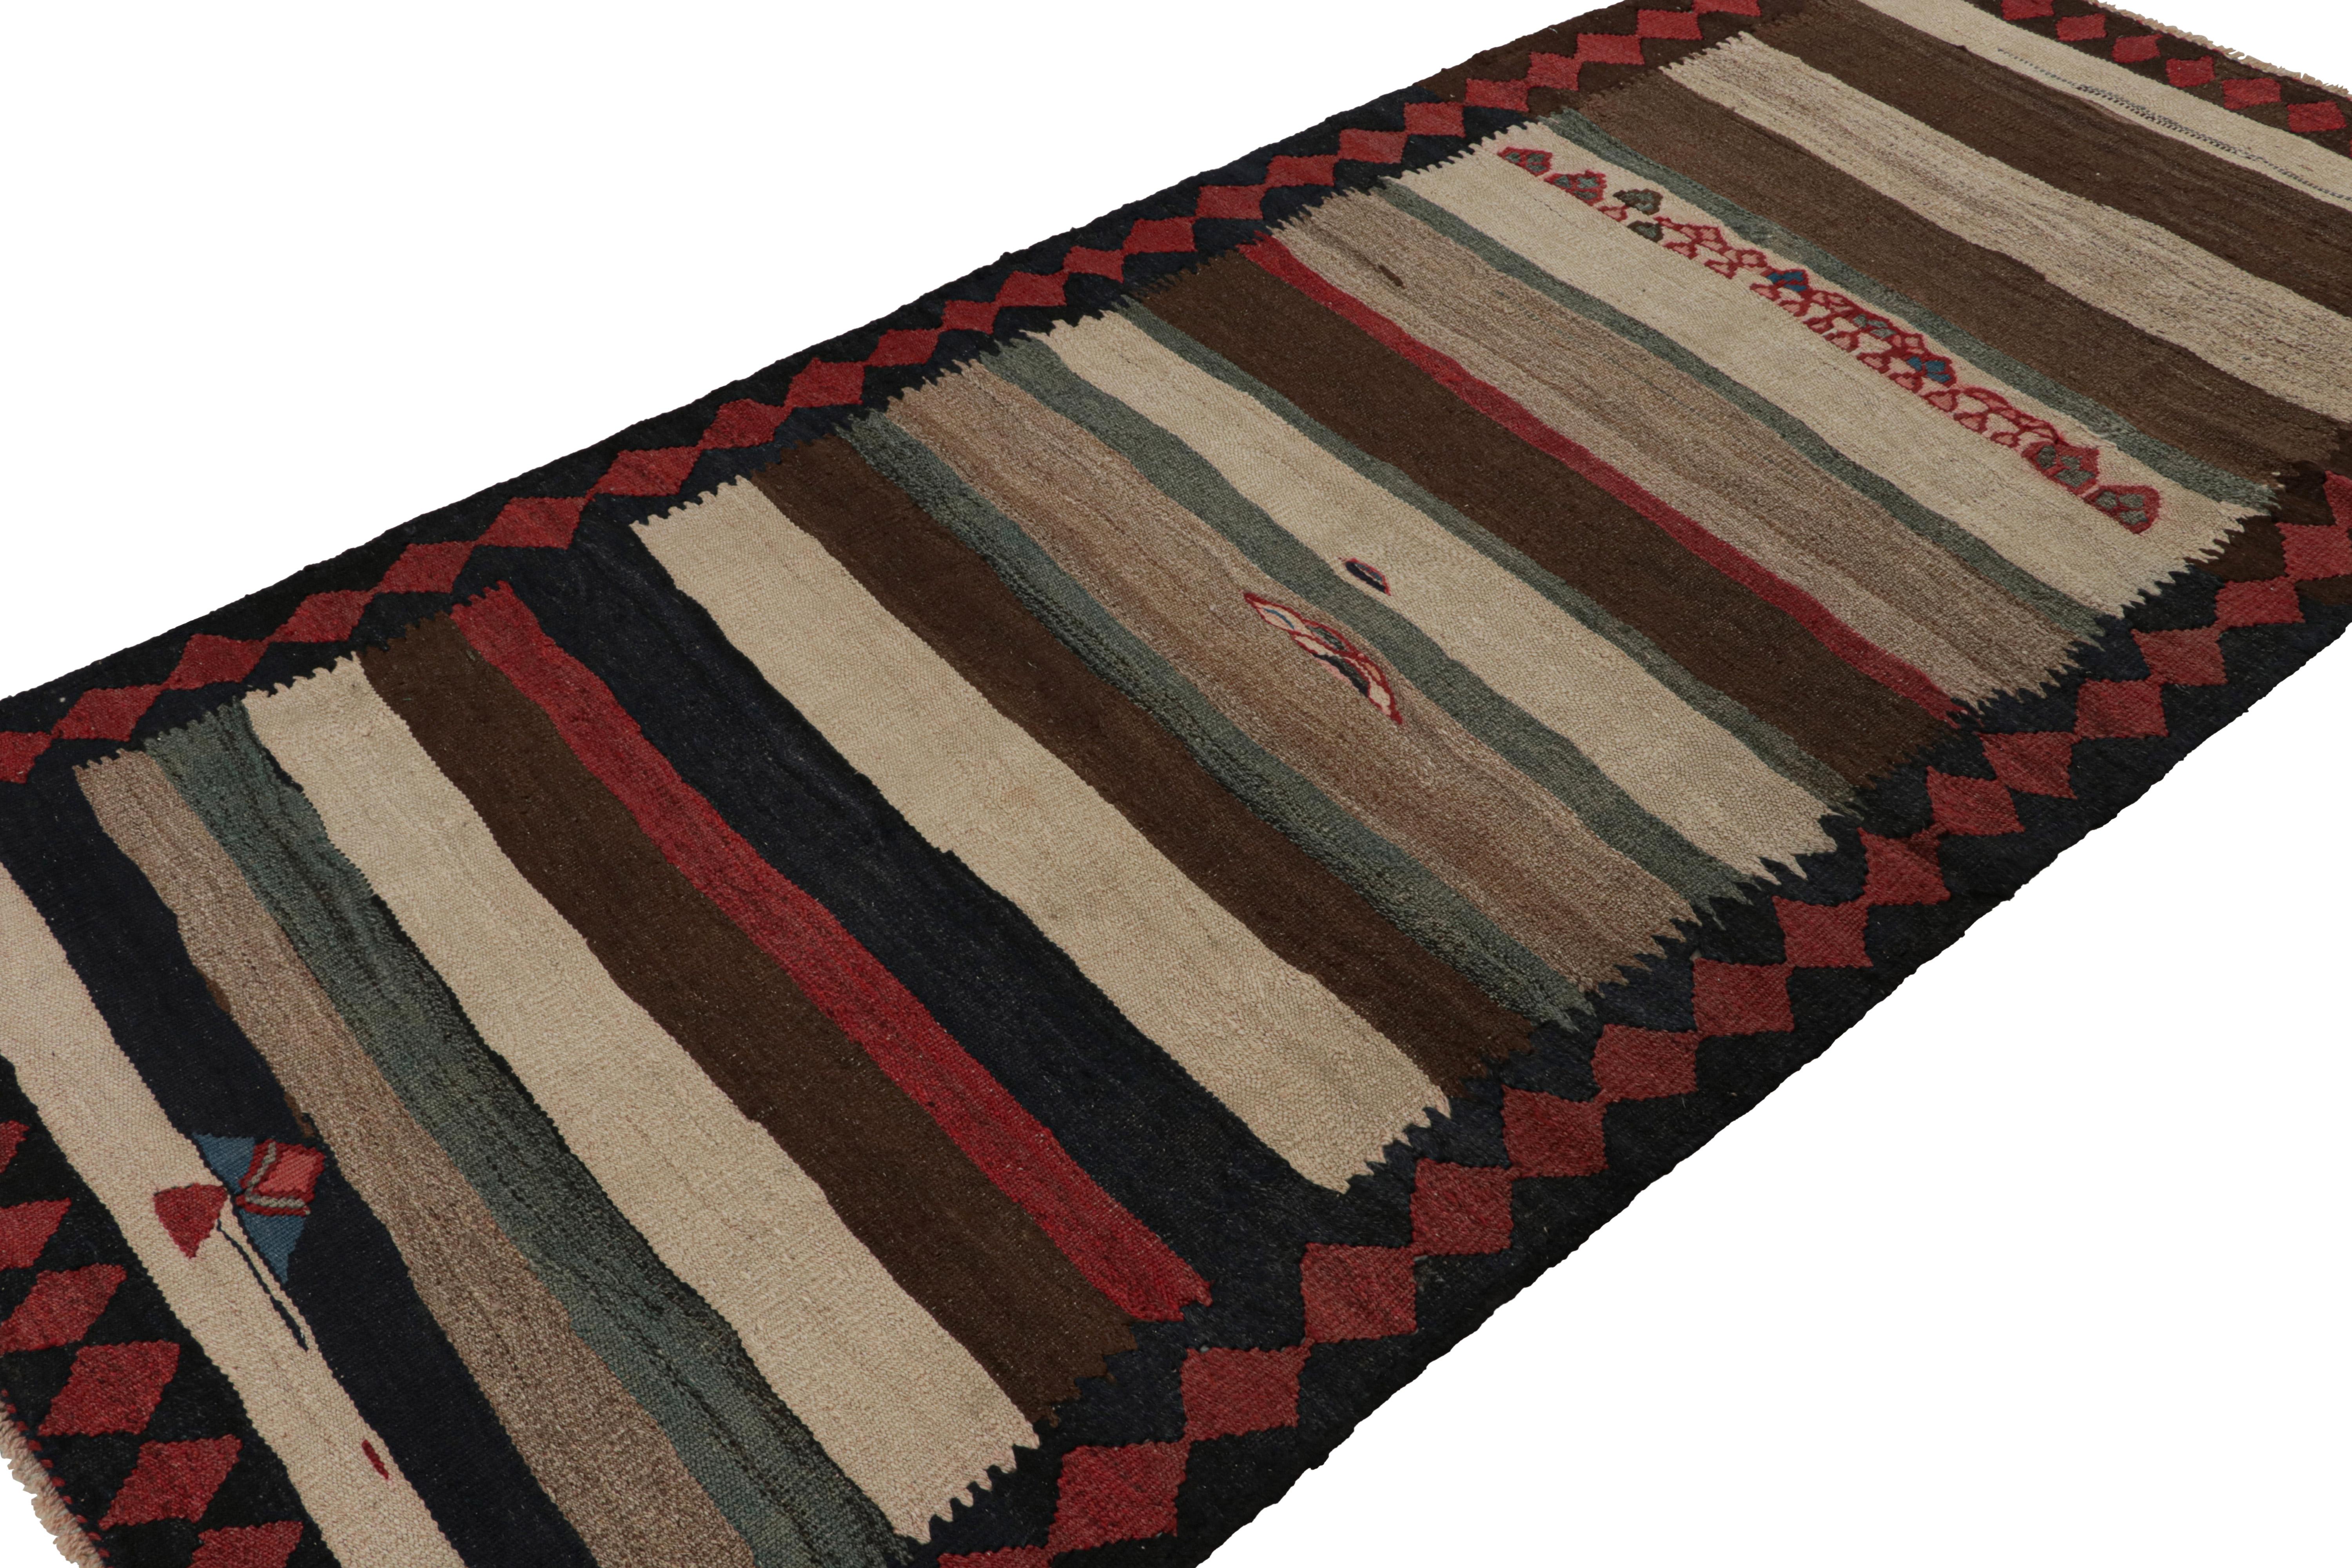 Handwoven in wool, circa 1950-1960, this 6x10 vintage Shahsavan Persian tribal kilim rug is a rich primitivist piece with stripes and motifs together. 

On the Design: 

Representing Shahsavan tribal design aesthetics, this rug features a